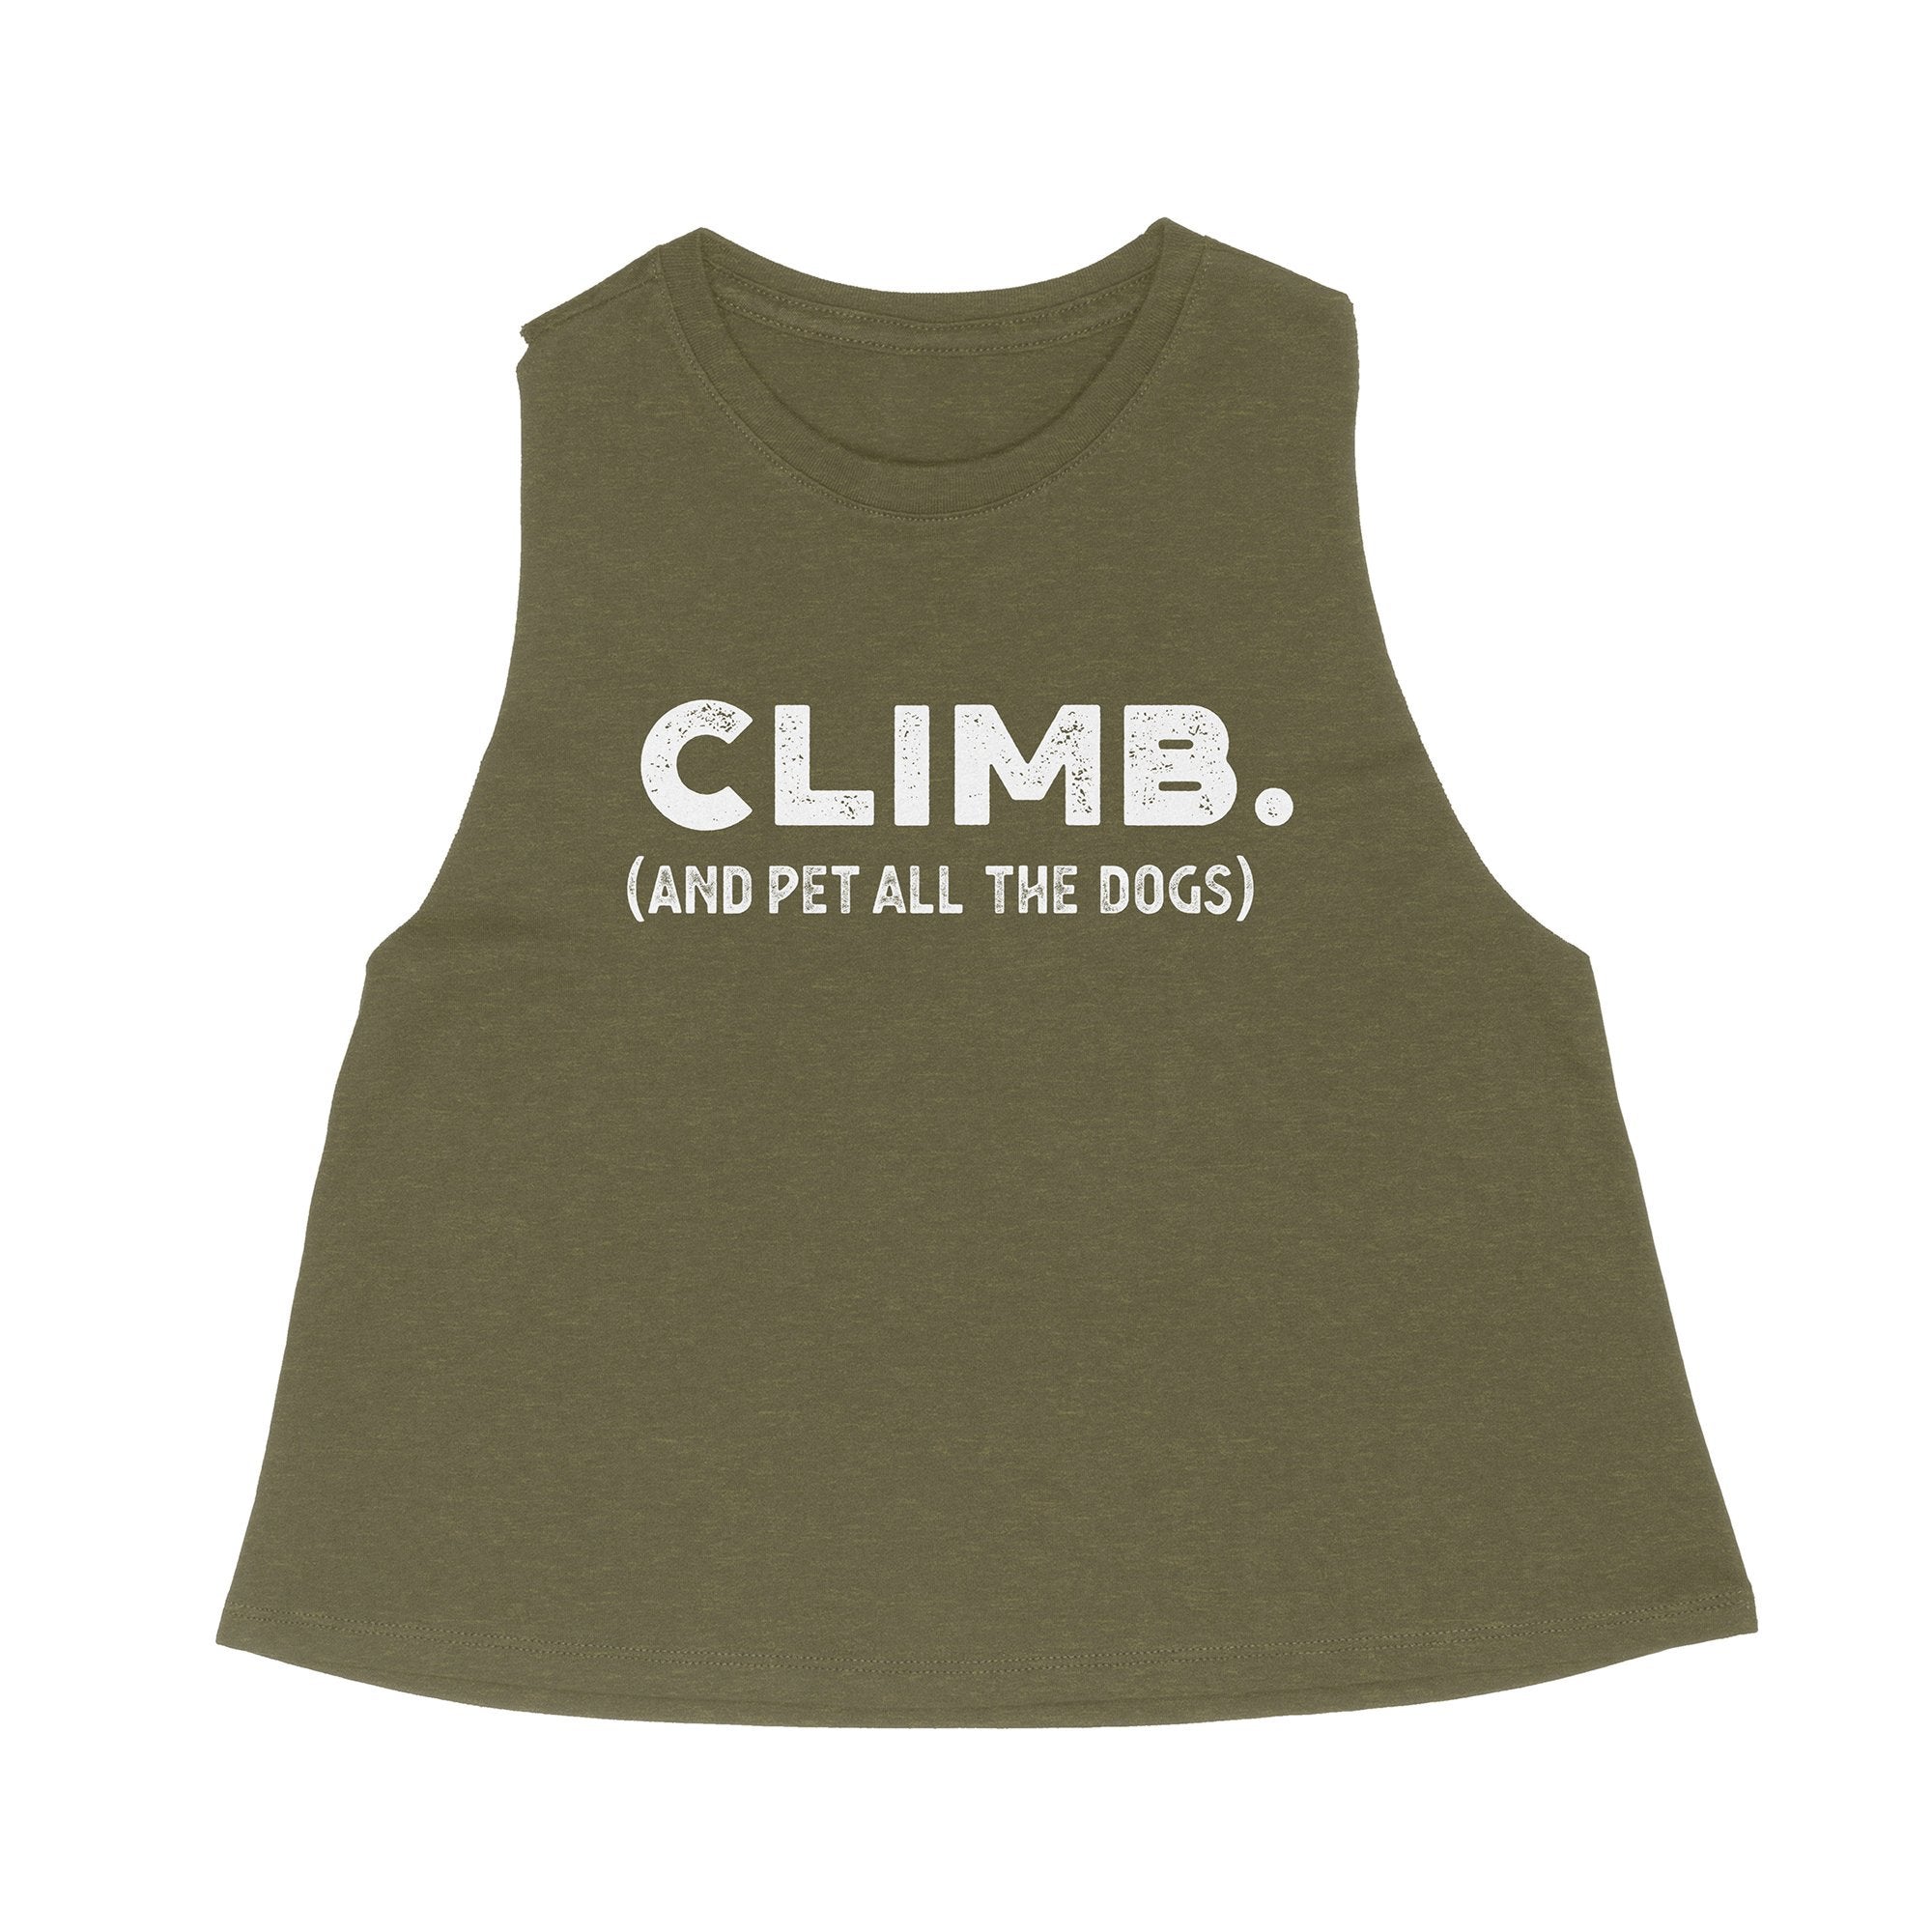 rock climbing t-shirts gifts - Women's Crop Tanks-Climb and Pet All the Dogs — Women's Racerback Crop Tank Top - Dynamite Starfish - gift for climber